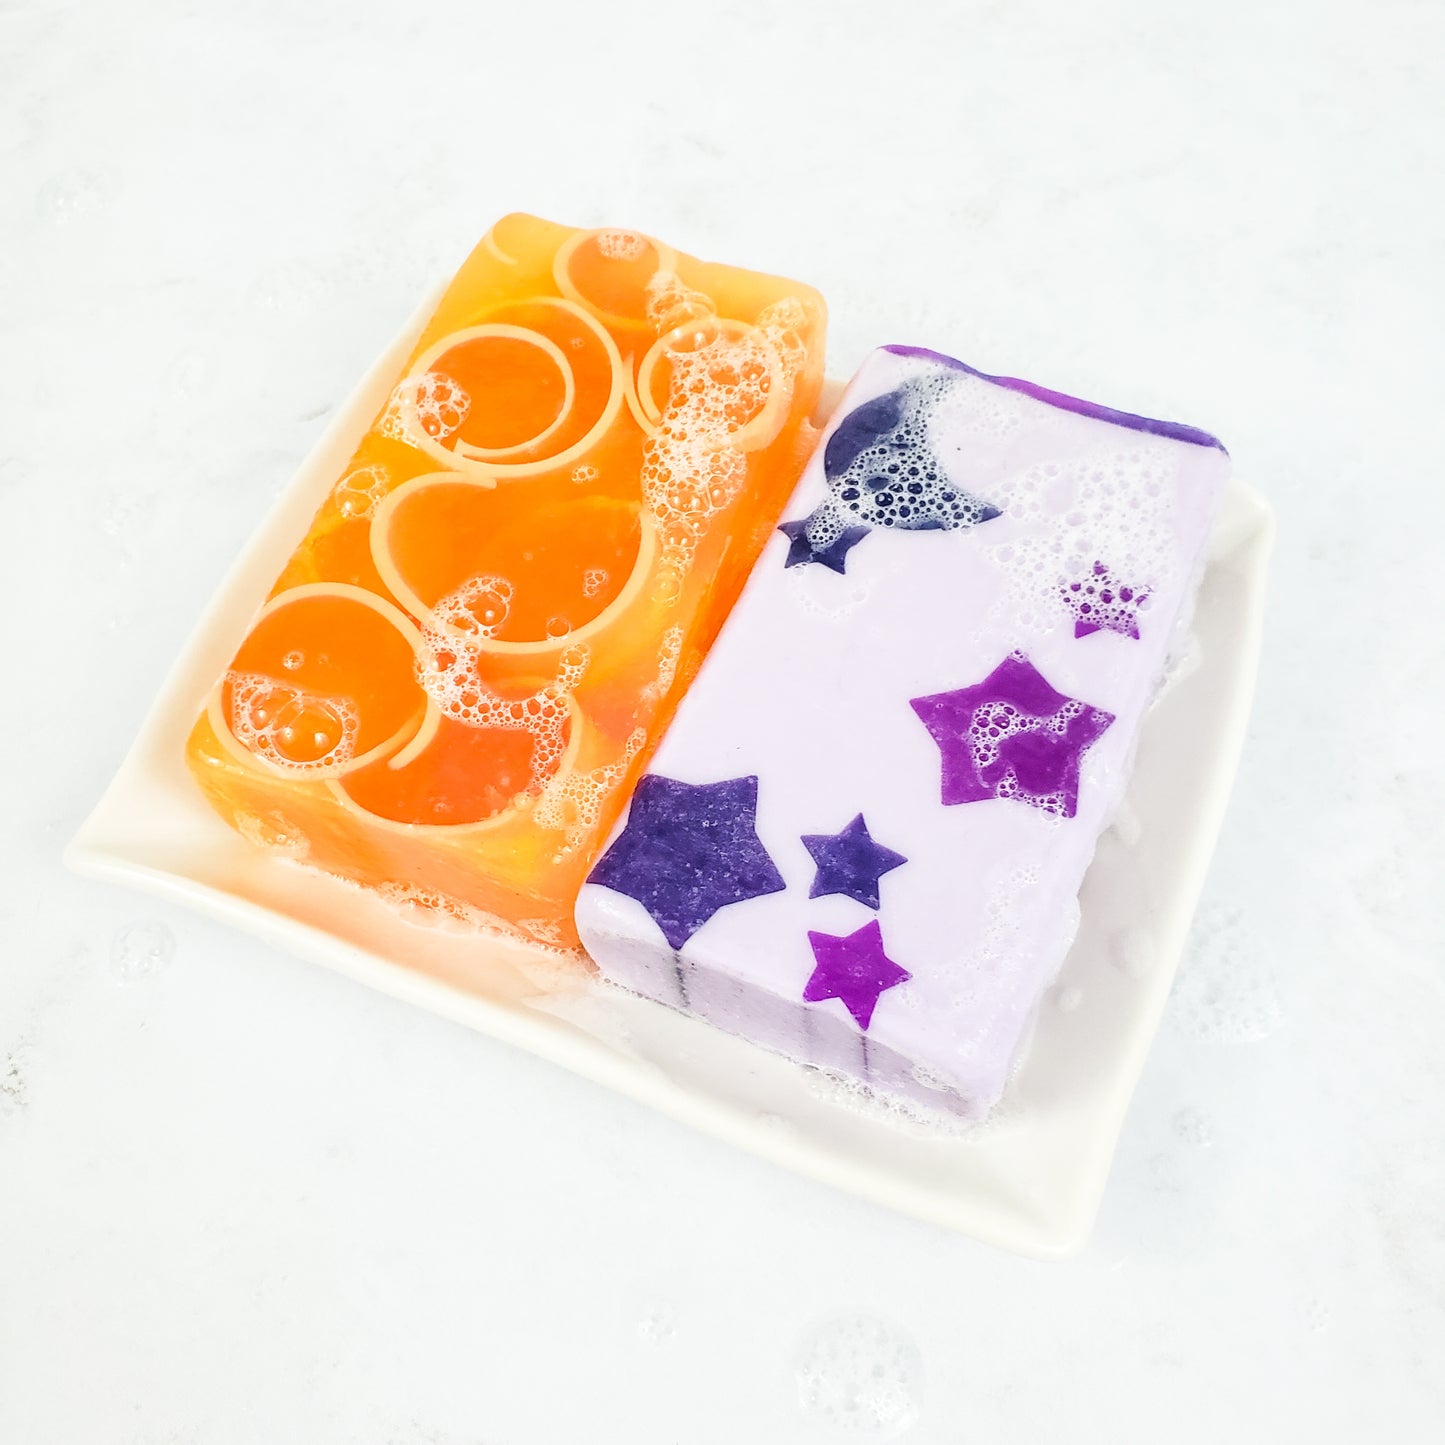 Two bars of soap (one orange, one purple with stars) on top of a white rectangle soap dish. On a white background.